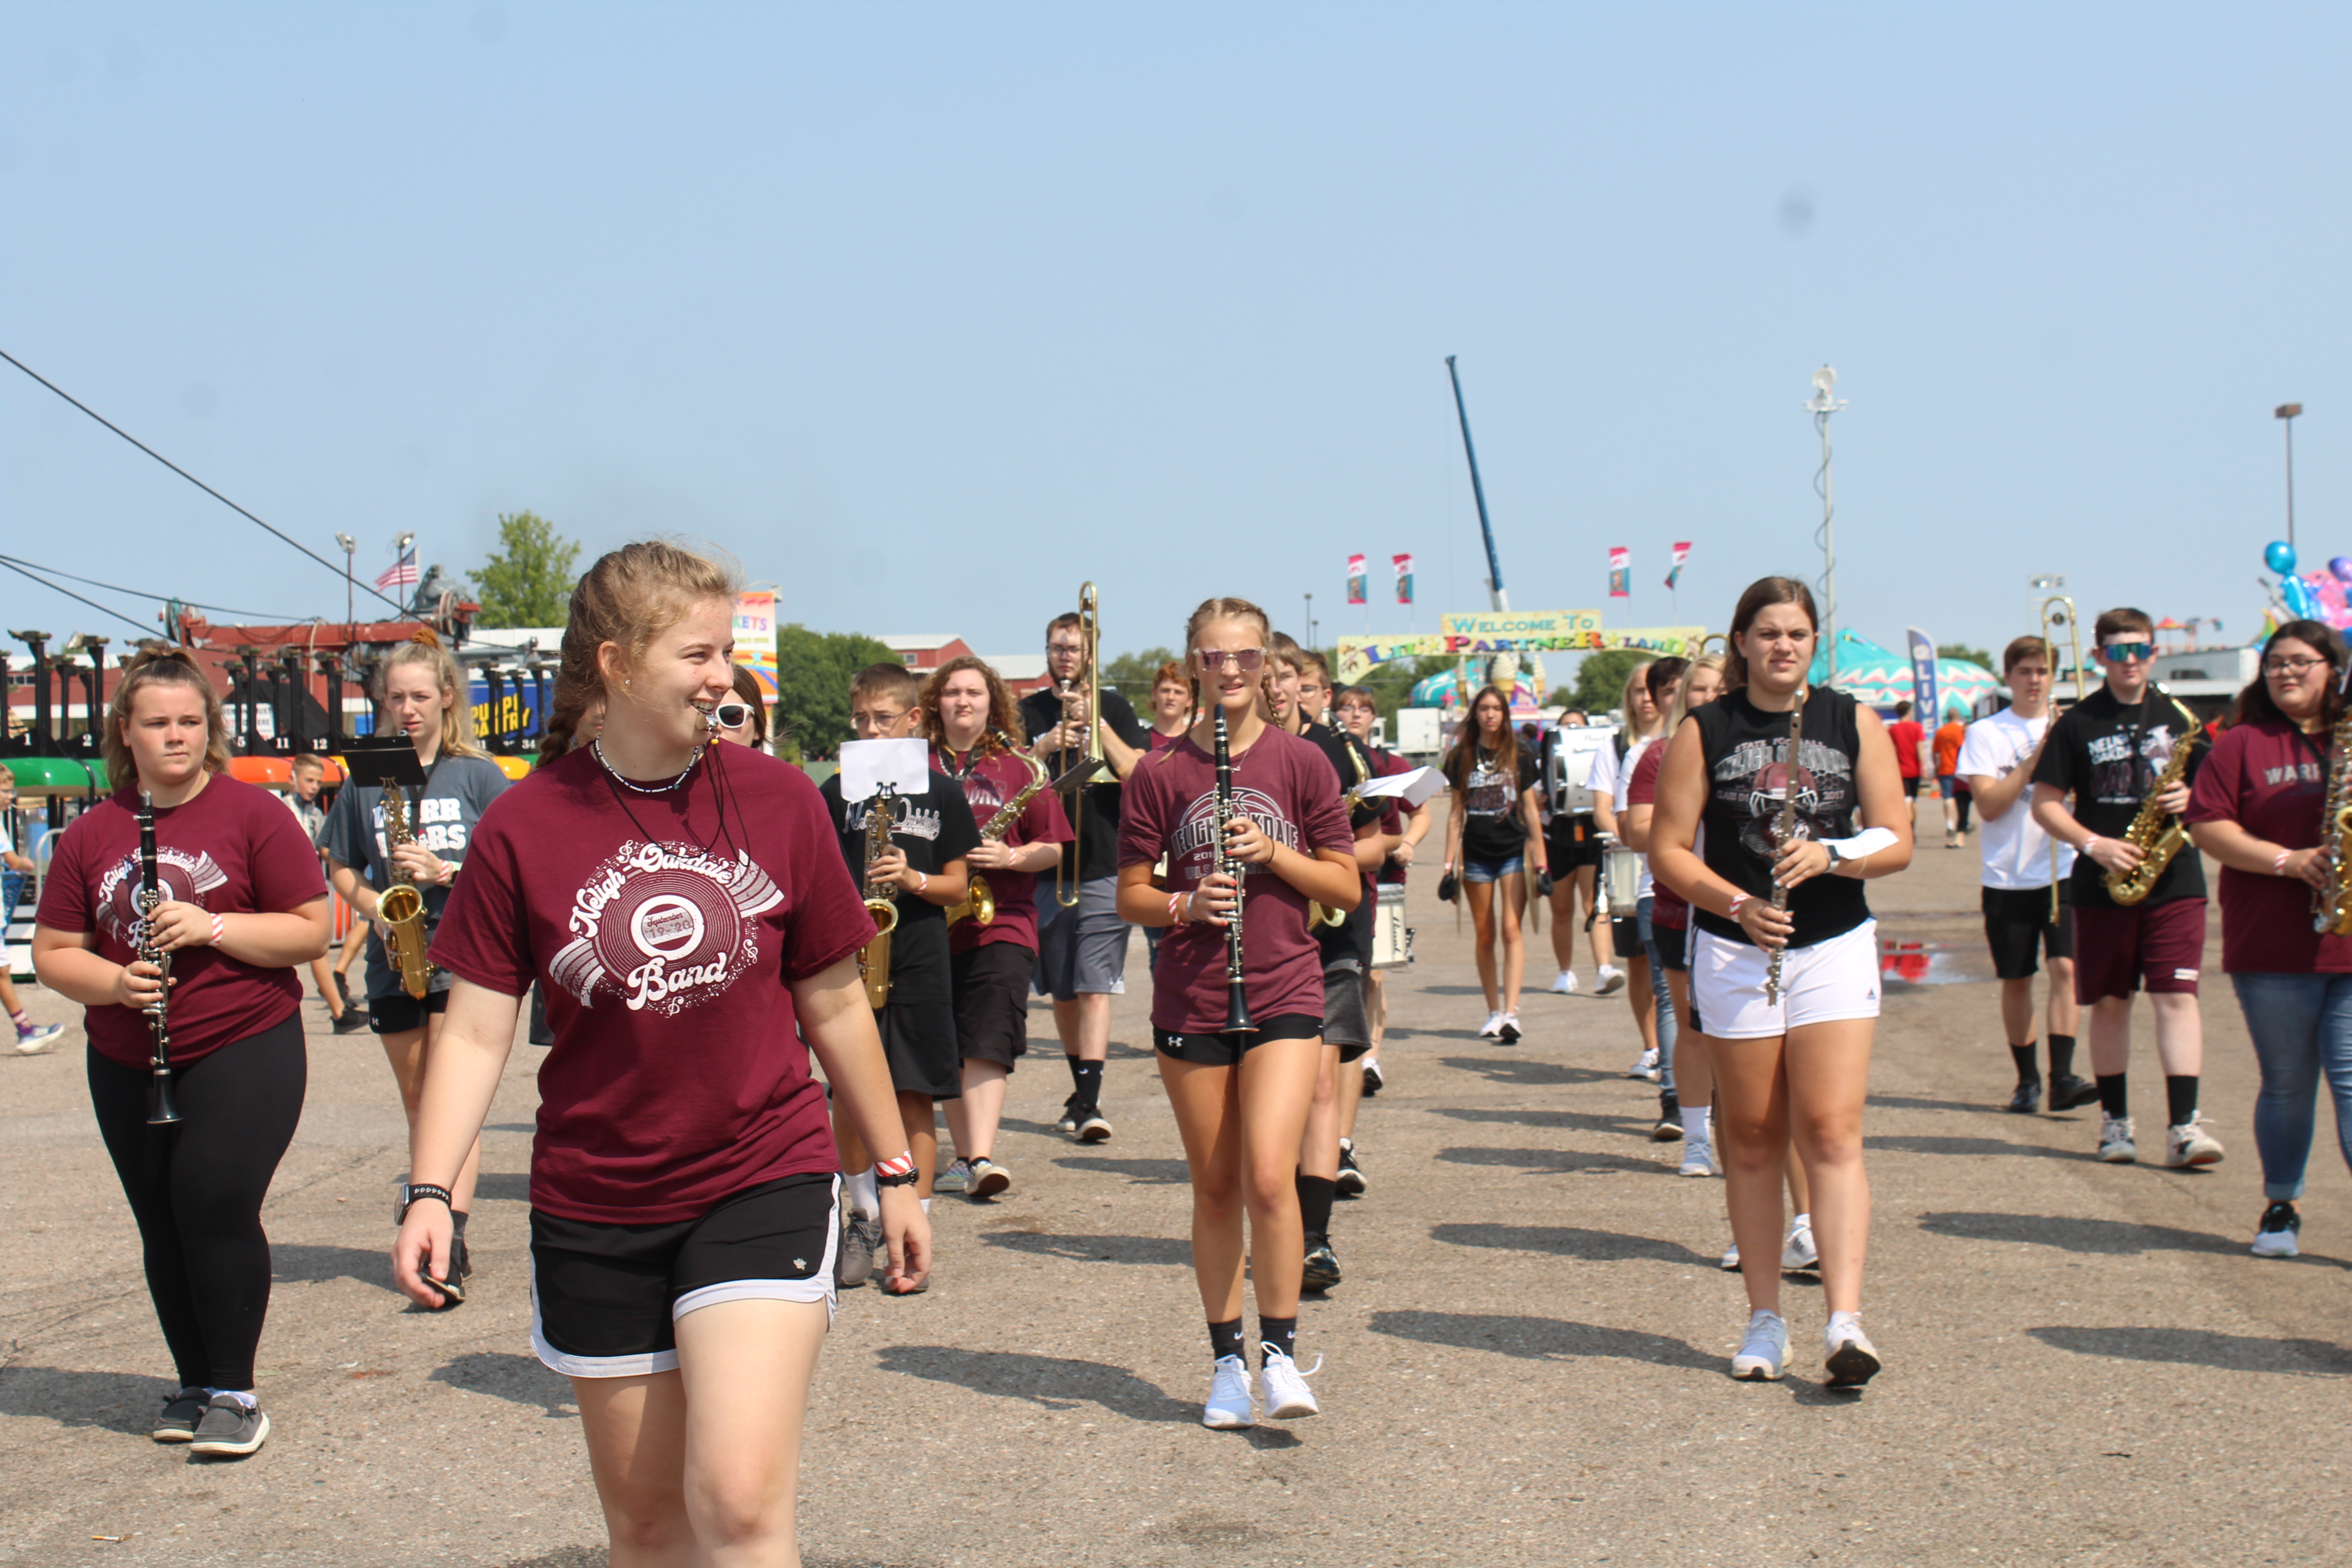 The band is getting ready to march past a crowd at the state fair.